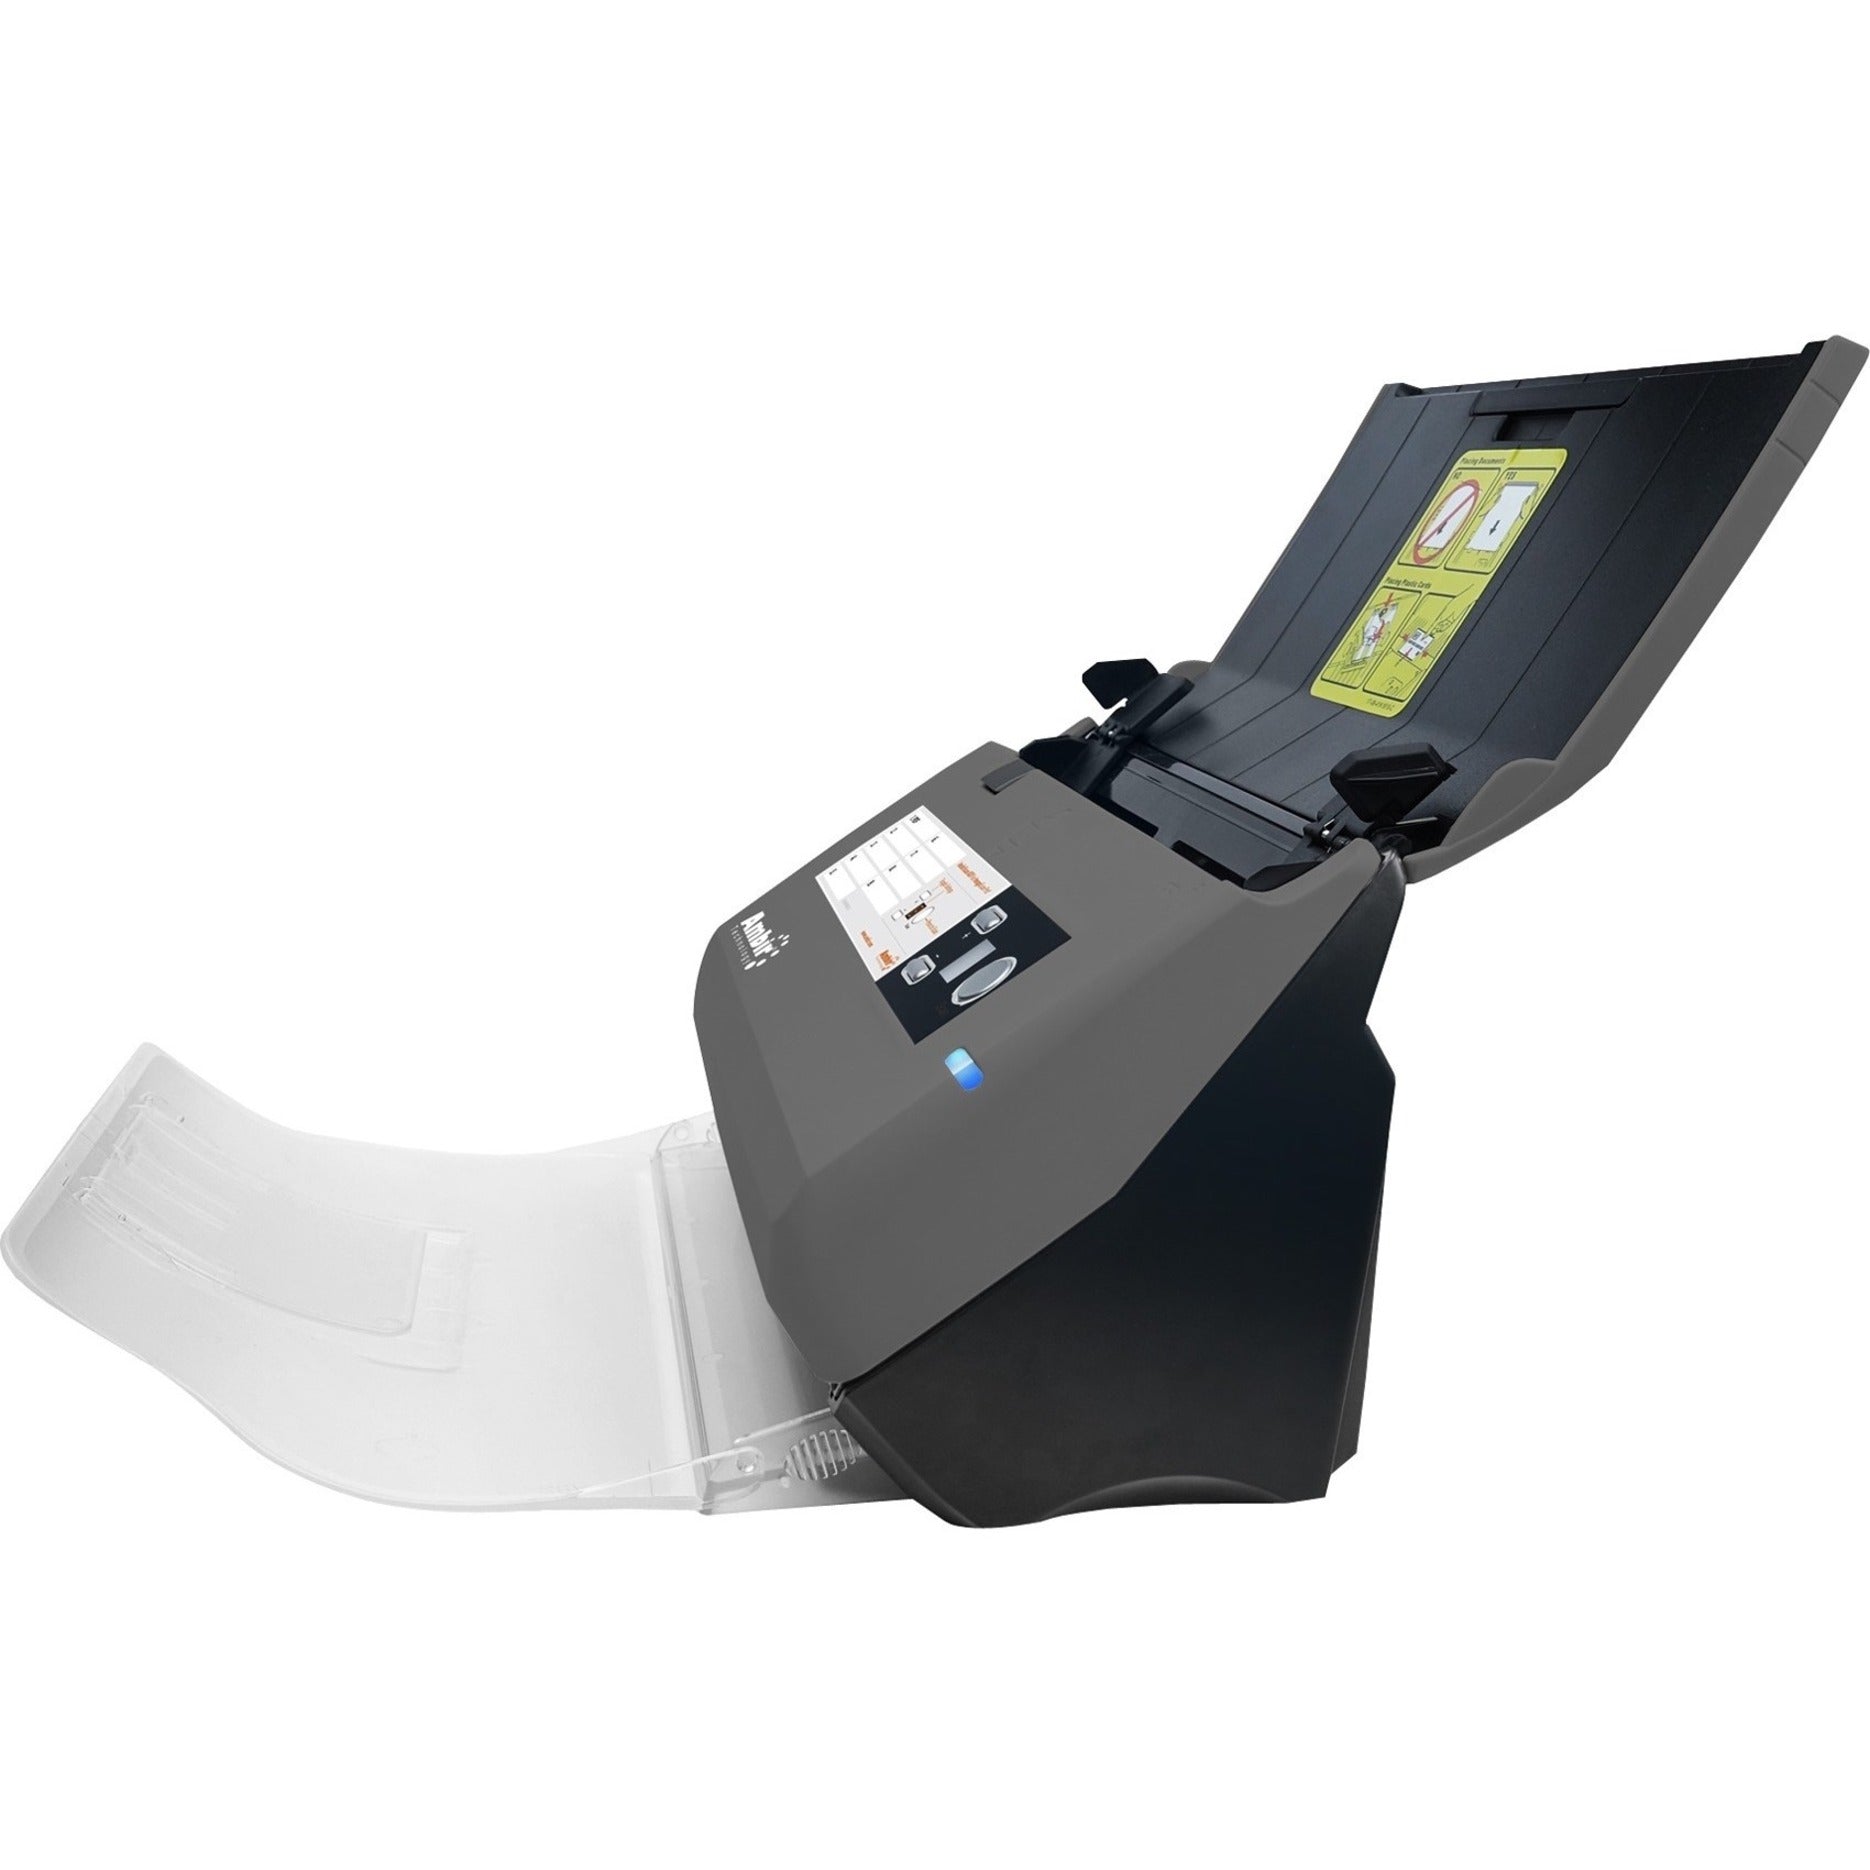 Ambir DS830ix-ATH ImageScan Pro 830ix for Athenahealth Users, Sheetfed Scanner, 600 dpi Optical Resolution, Duplex Scanning, 50 Sheet ADF Capacity